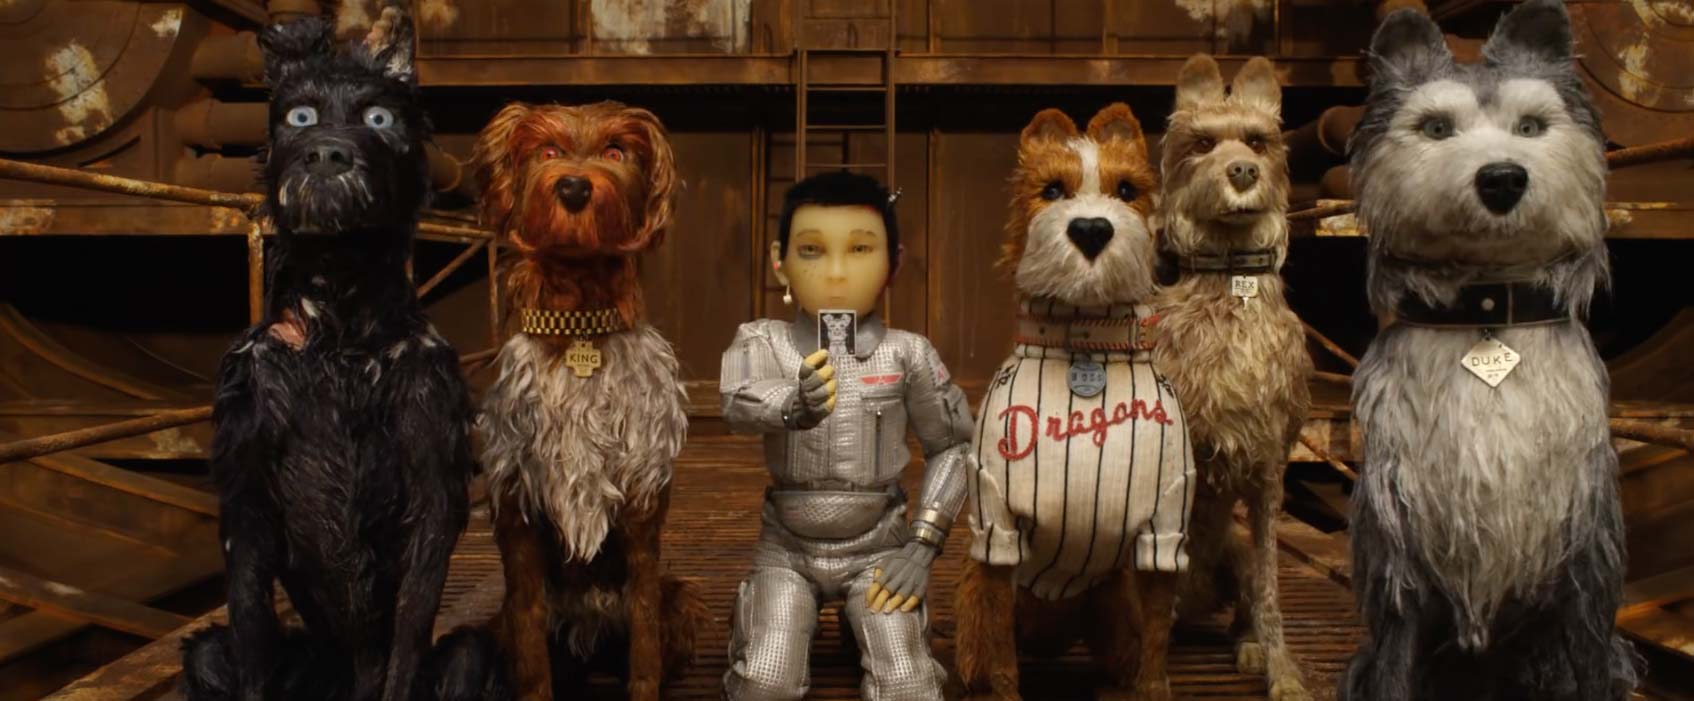 Isle of Dogs de Wes Anderson  (7)